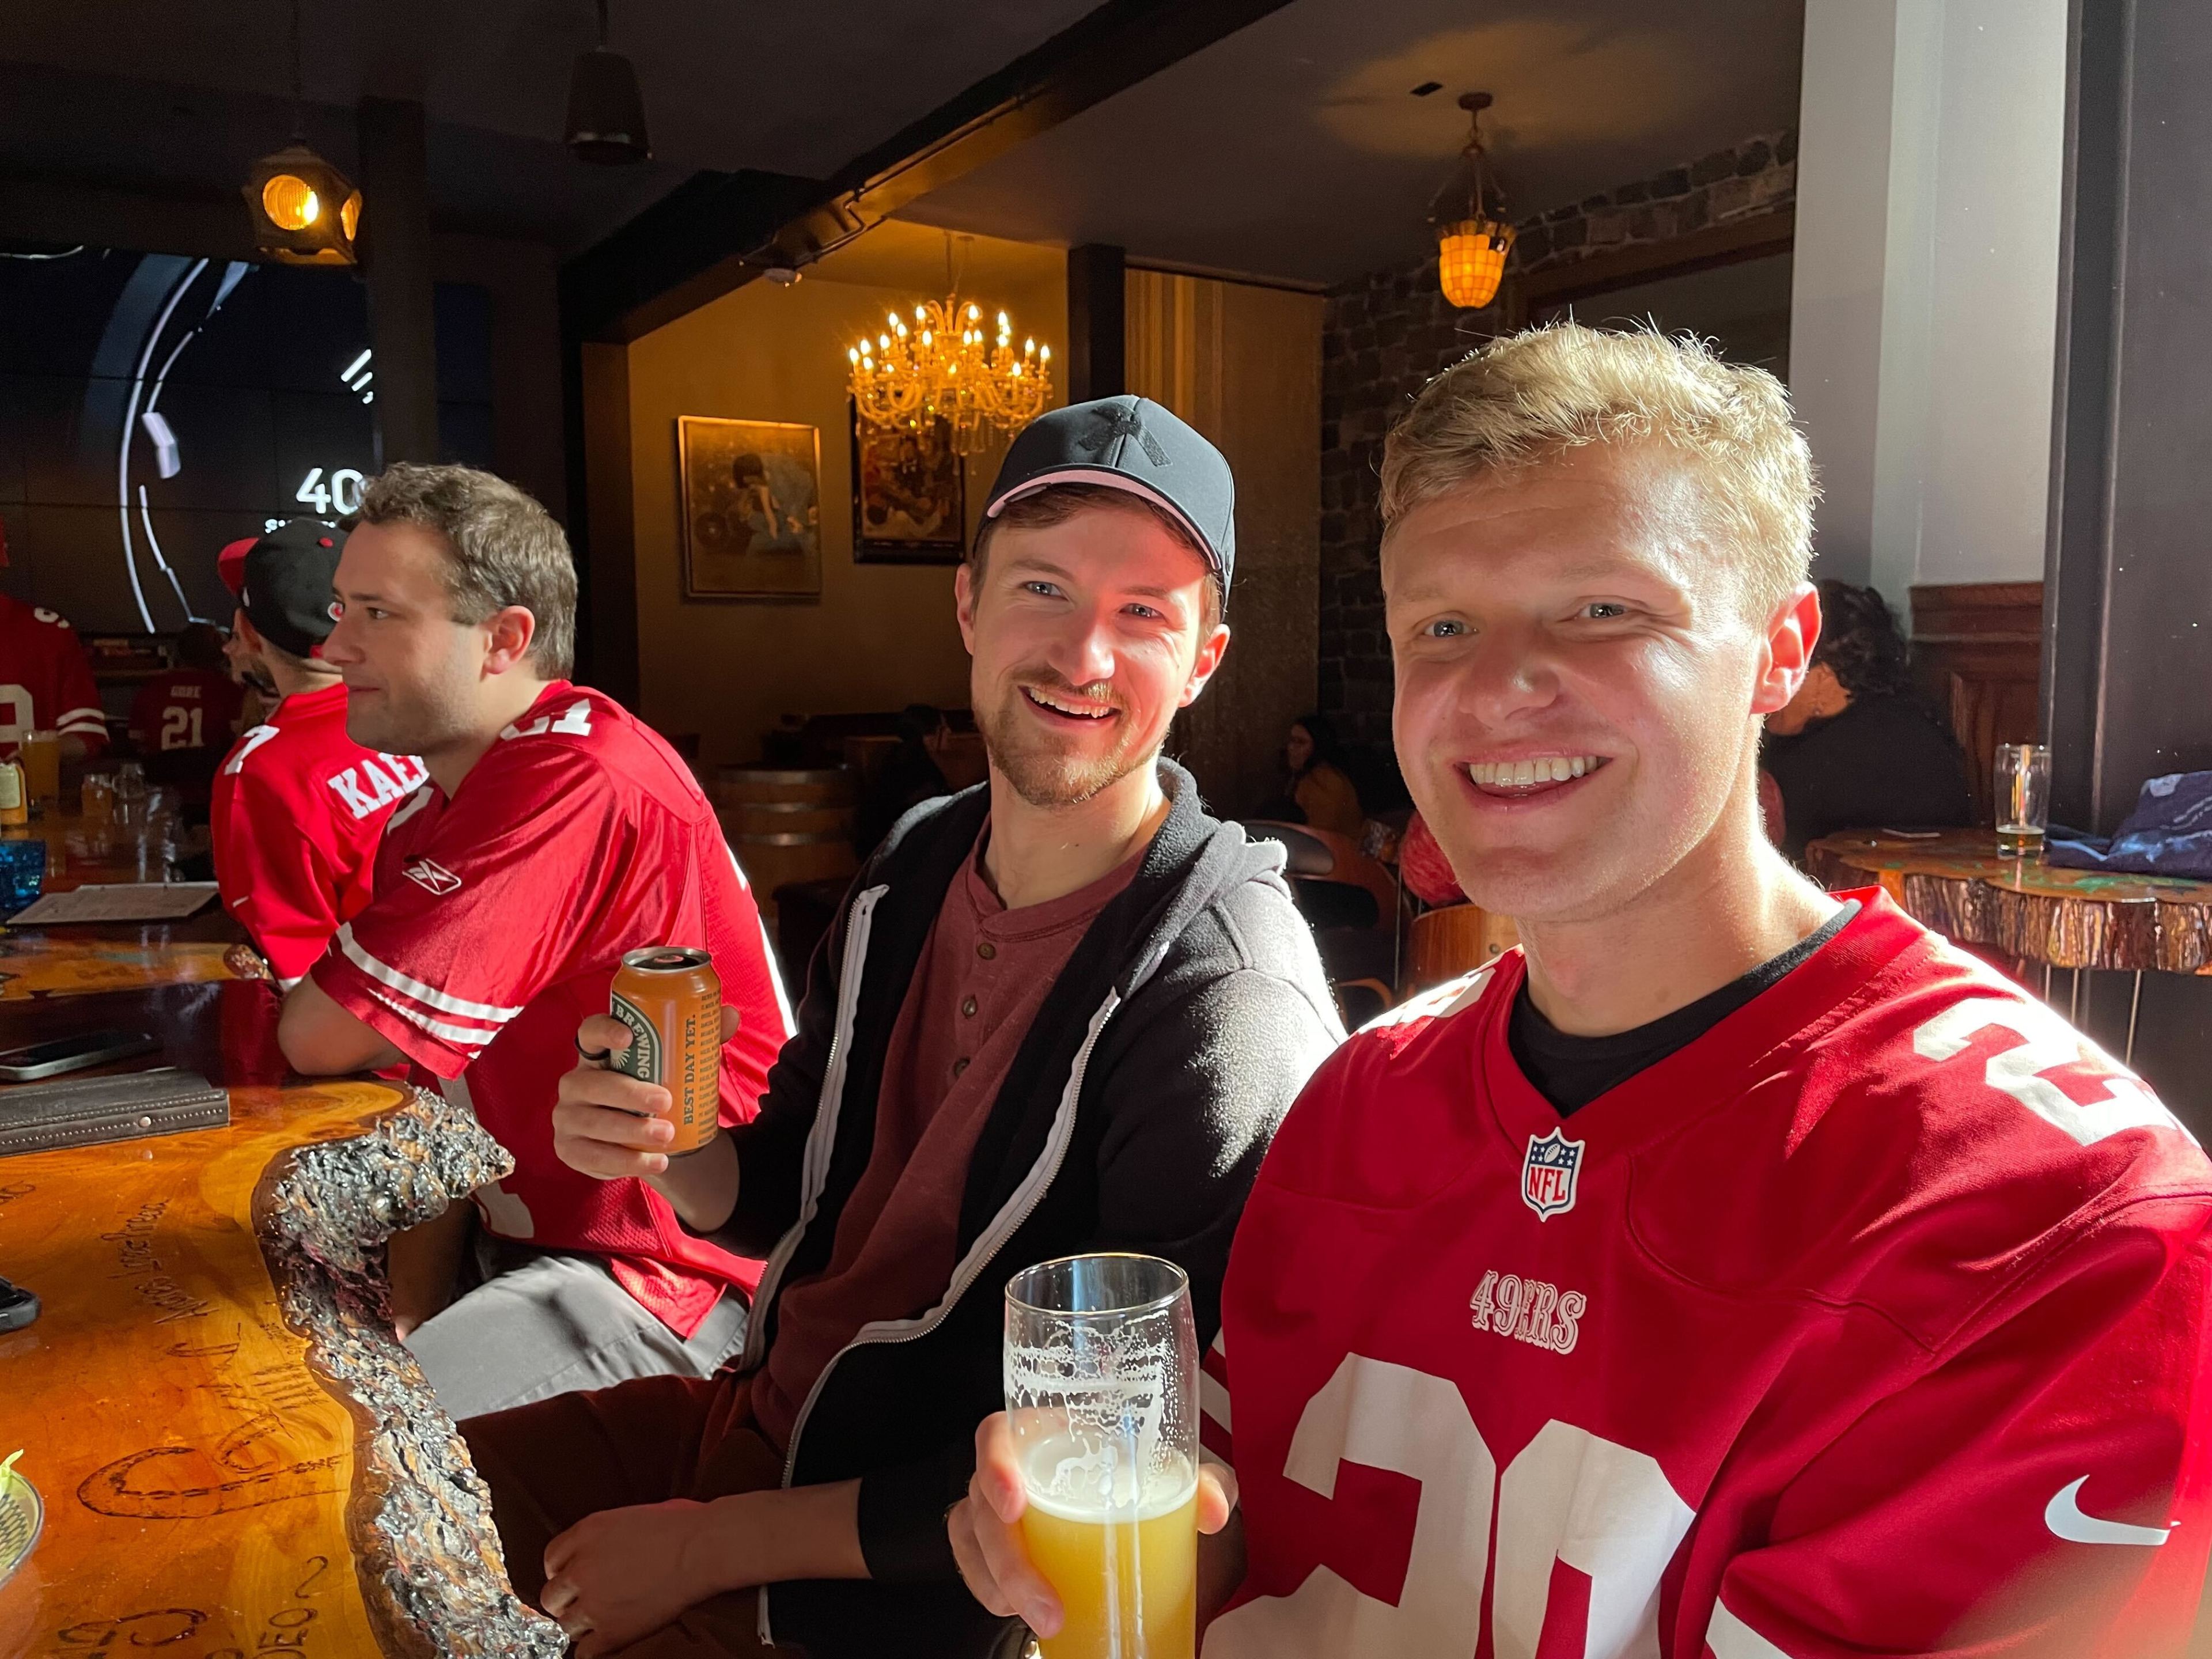 Three men in a pub, two smiling at the camera, one with a beer, in a cheerful atmosphere with sports on TV.